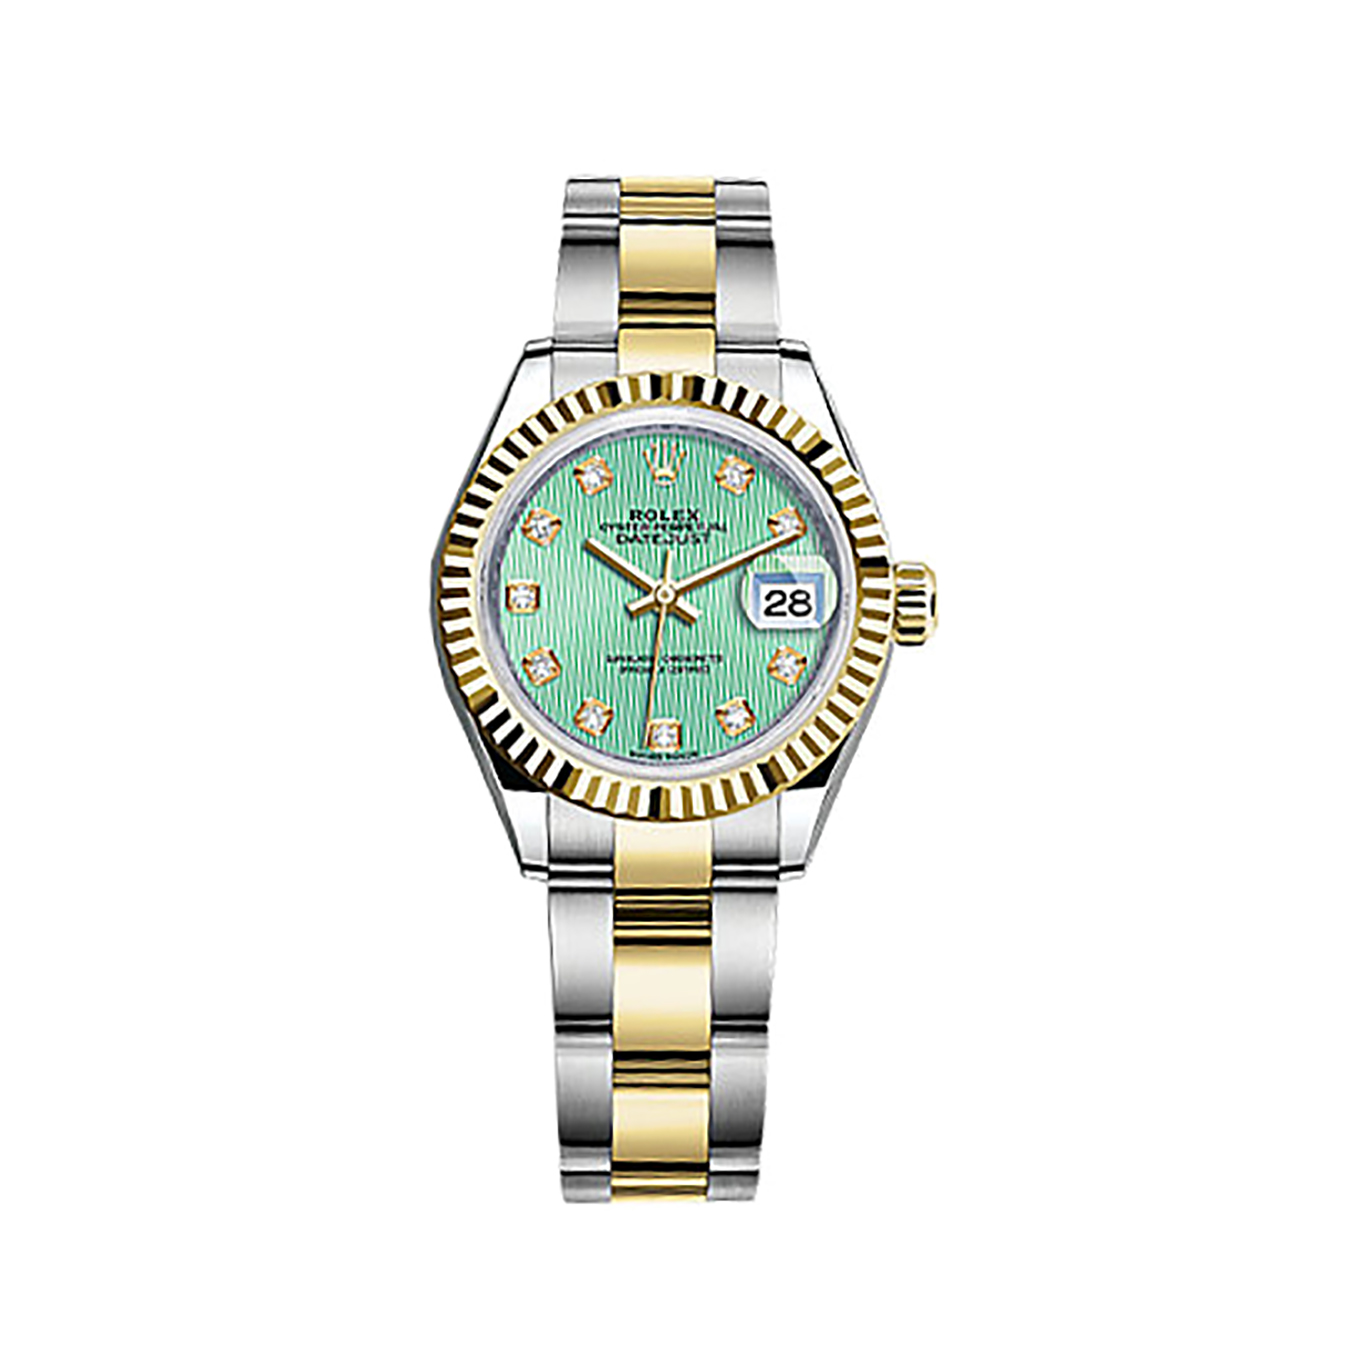 Lady-Datejust 28 279173 Gold & Stainless Steel Watch (Mint Green Set with Diamonds)